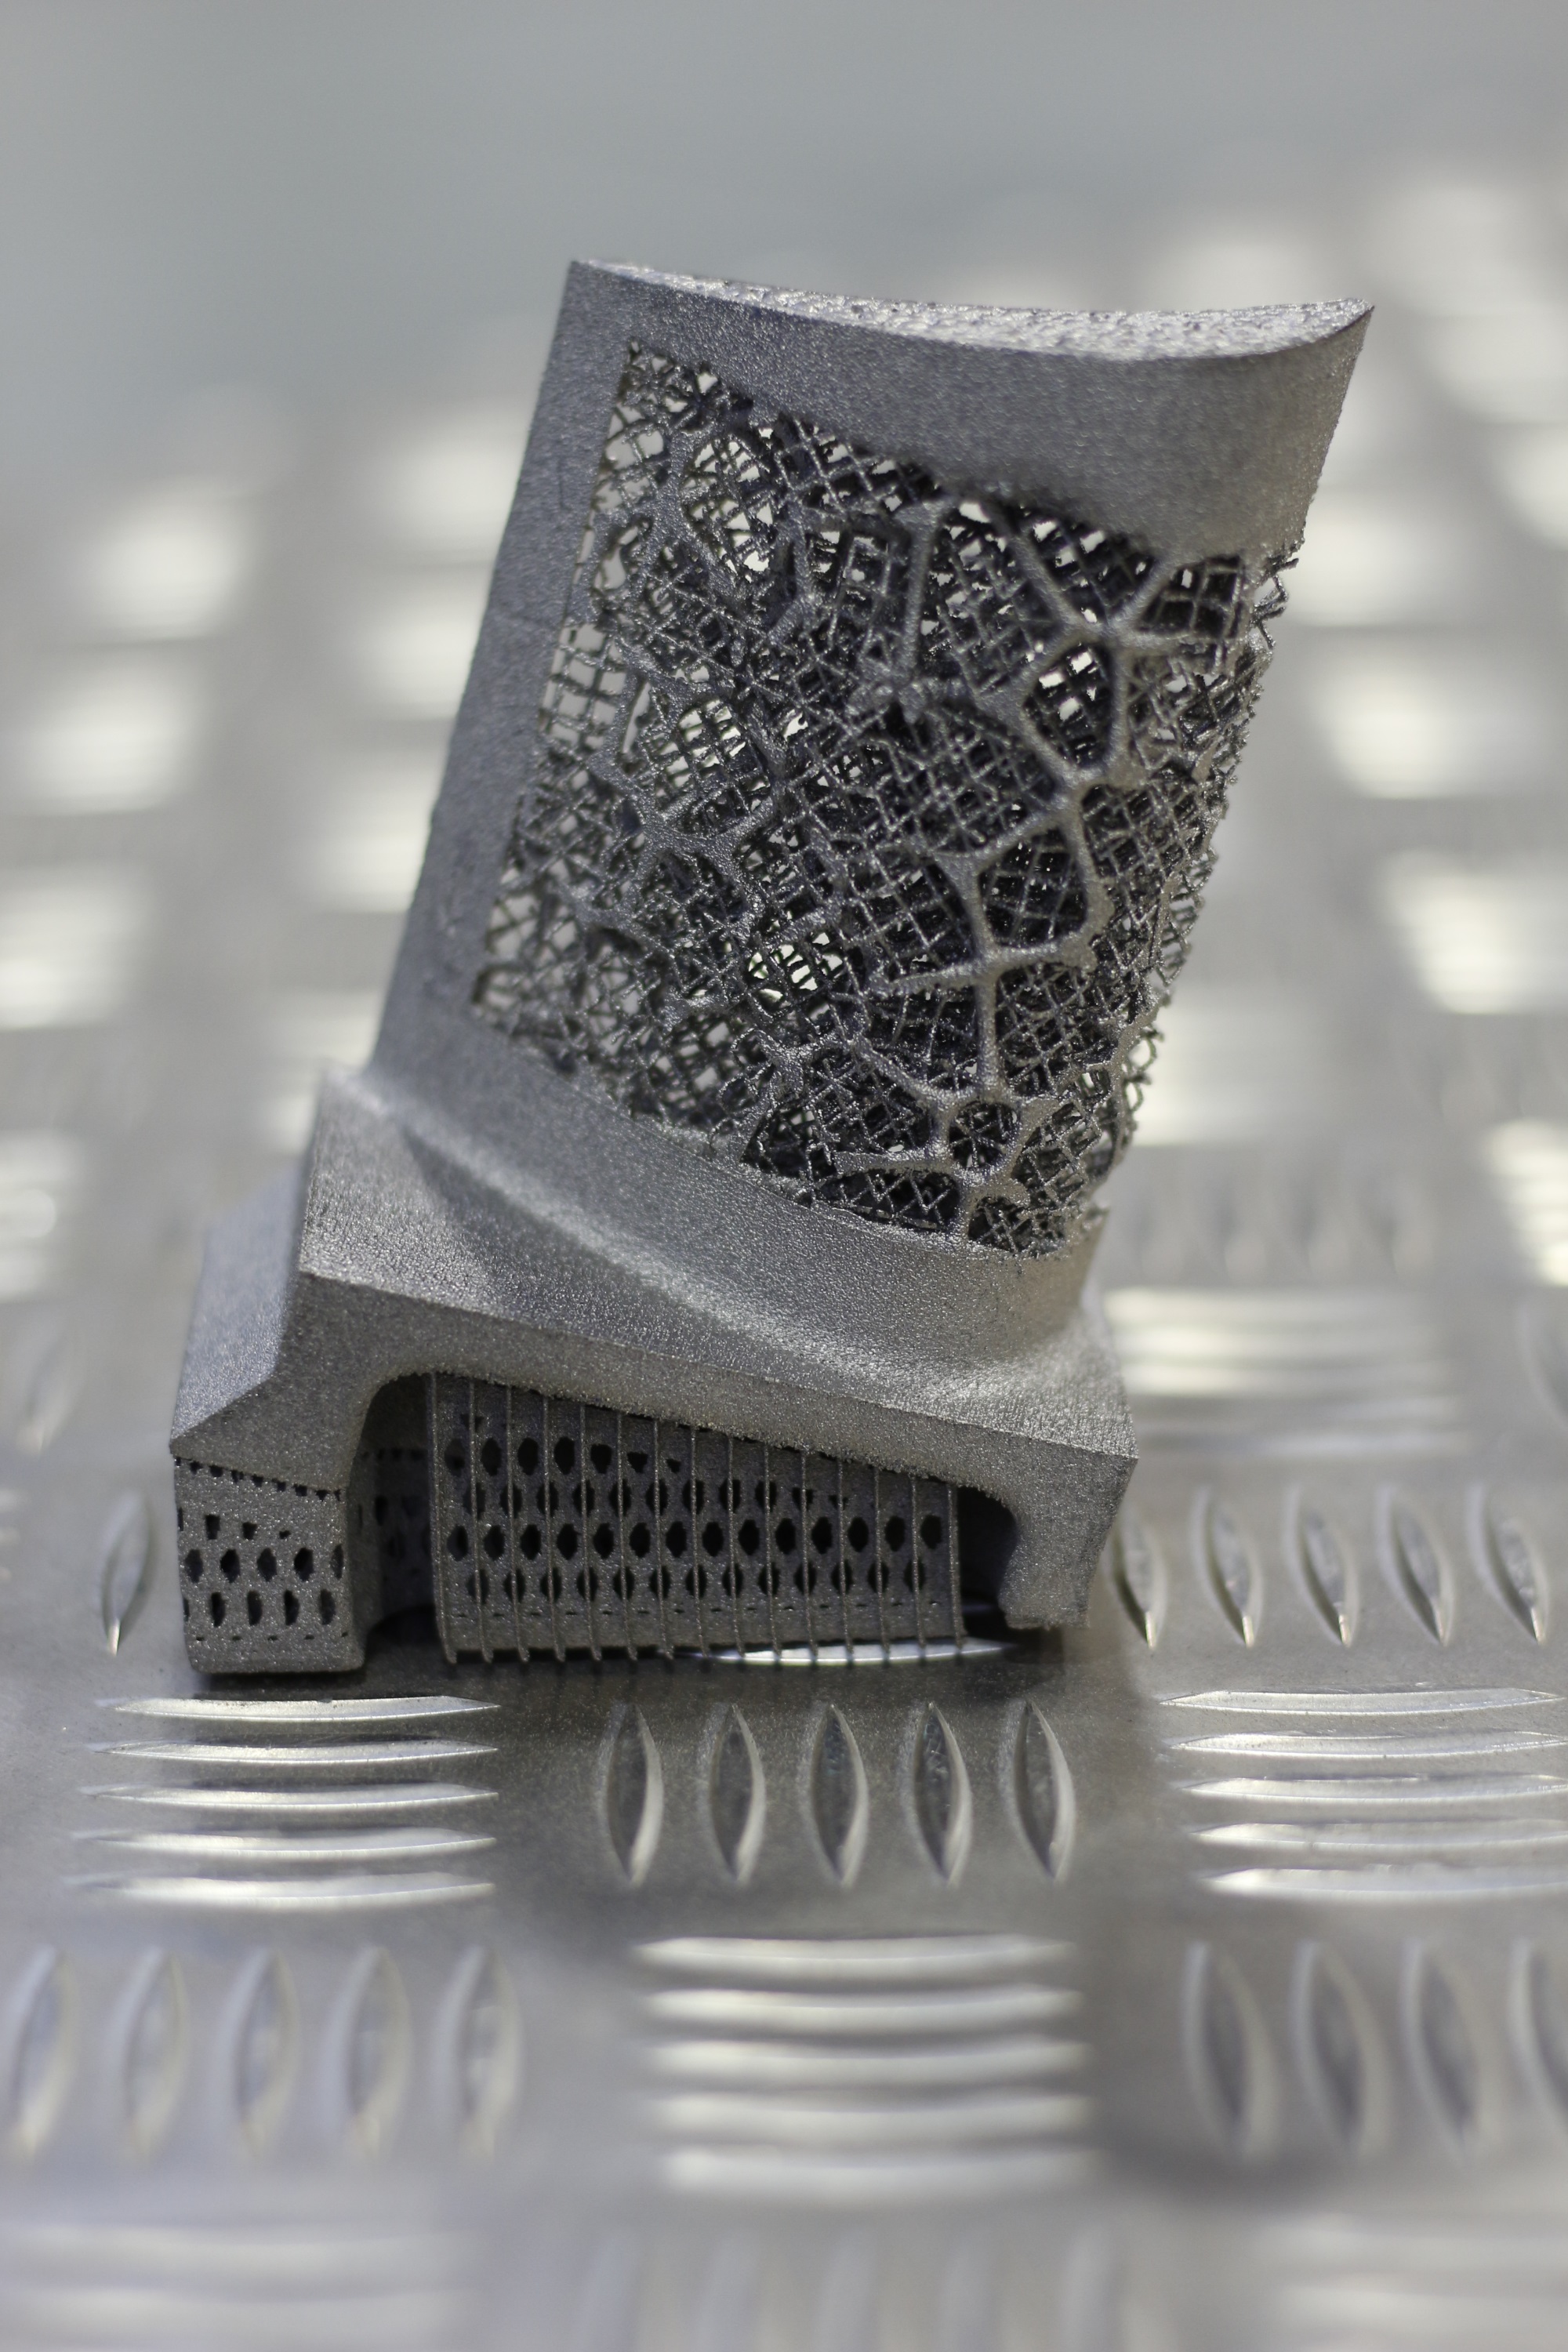 A printed component made up of ‘meta-crystals’ with varying orientations. Photo: University of Sheffield.